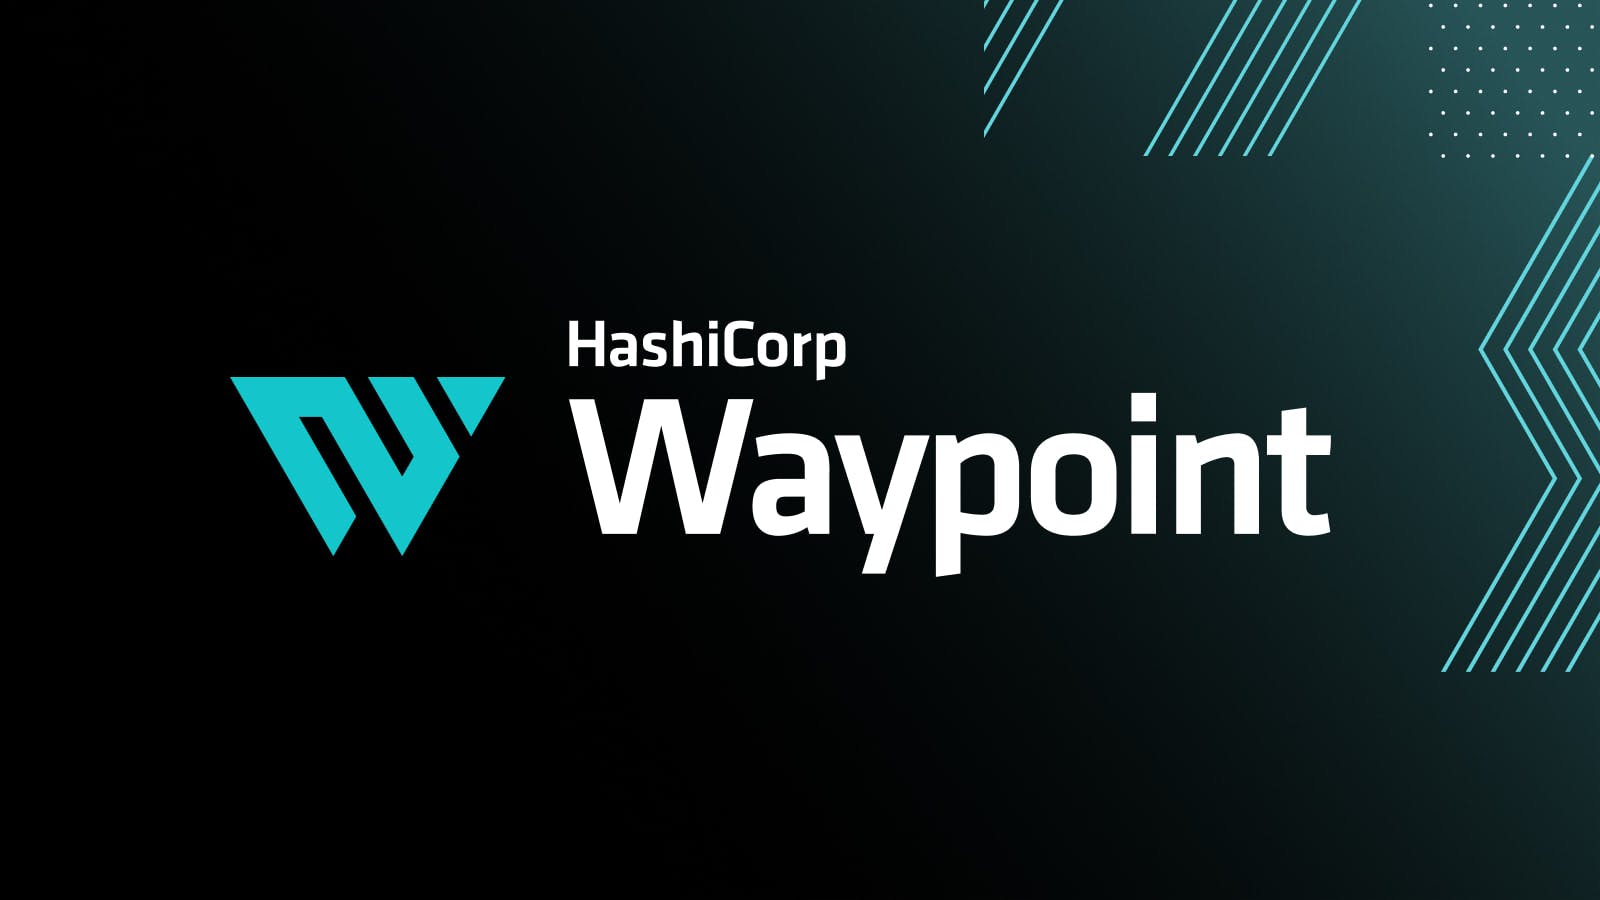 A new vision for HCP Waypoint